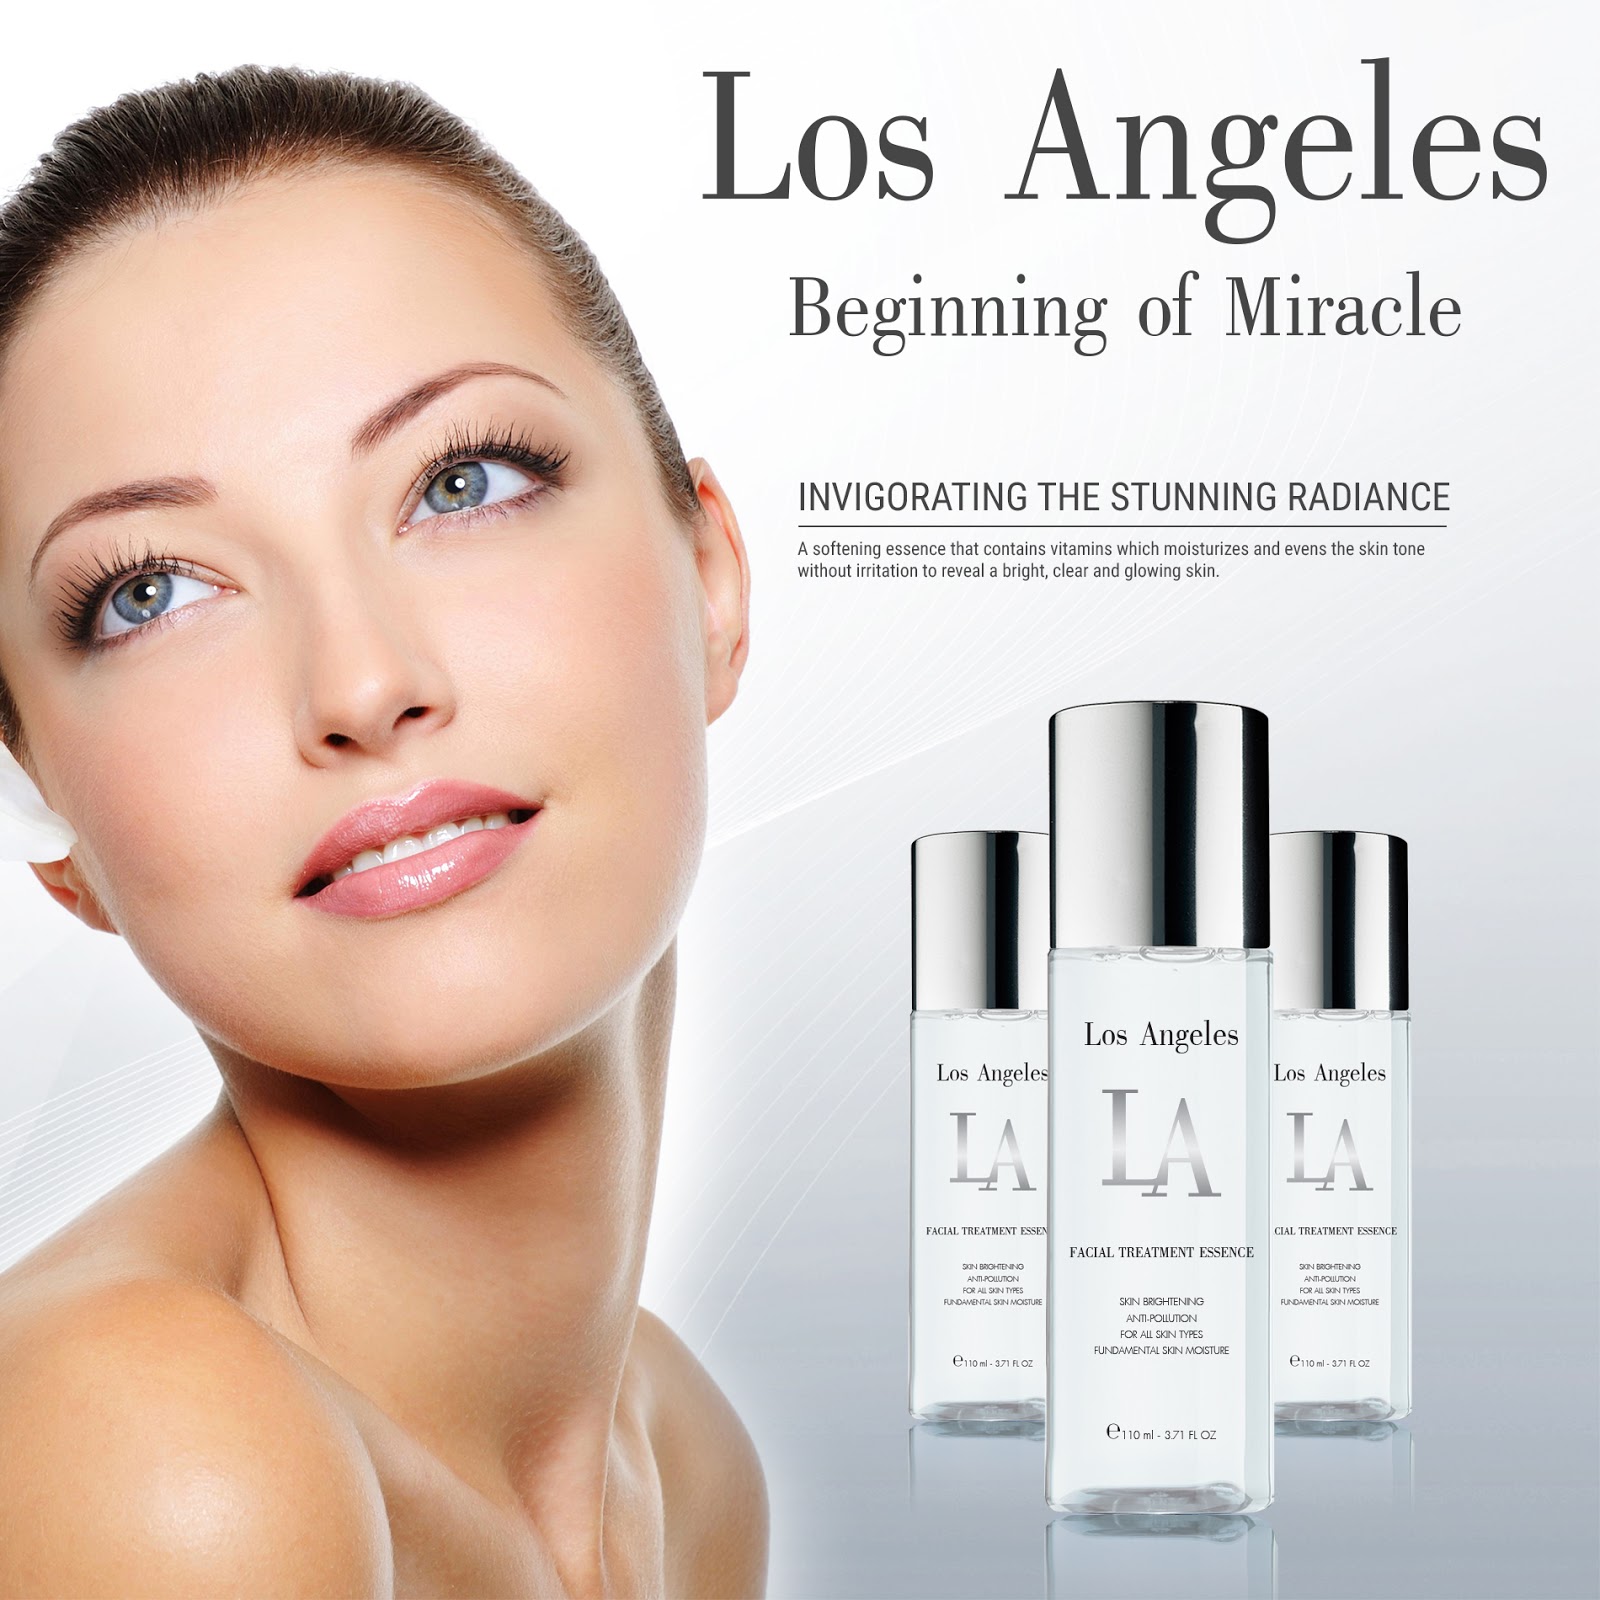 For all Skin Types. Revolution Soft Radiance. The faces of Angels. Care Essence перевод на русский.